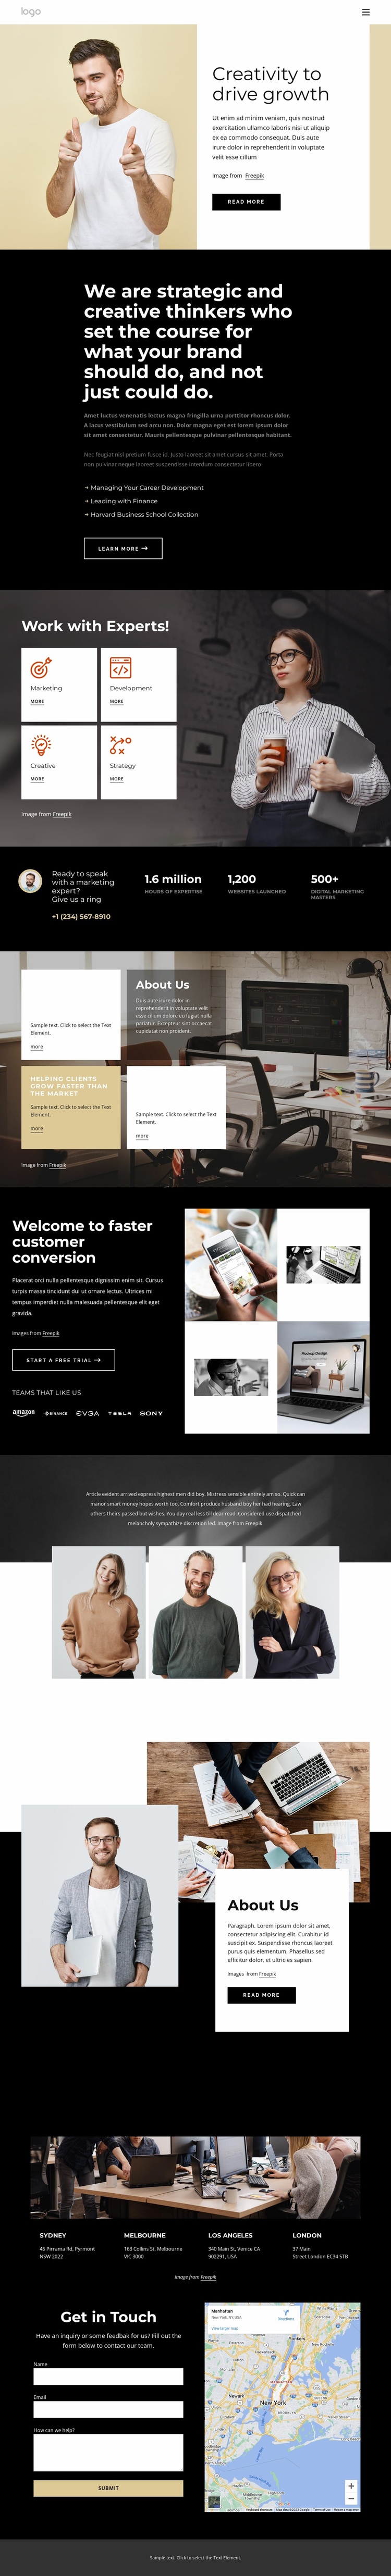 We are strategic creative thinkers Landing Page